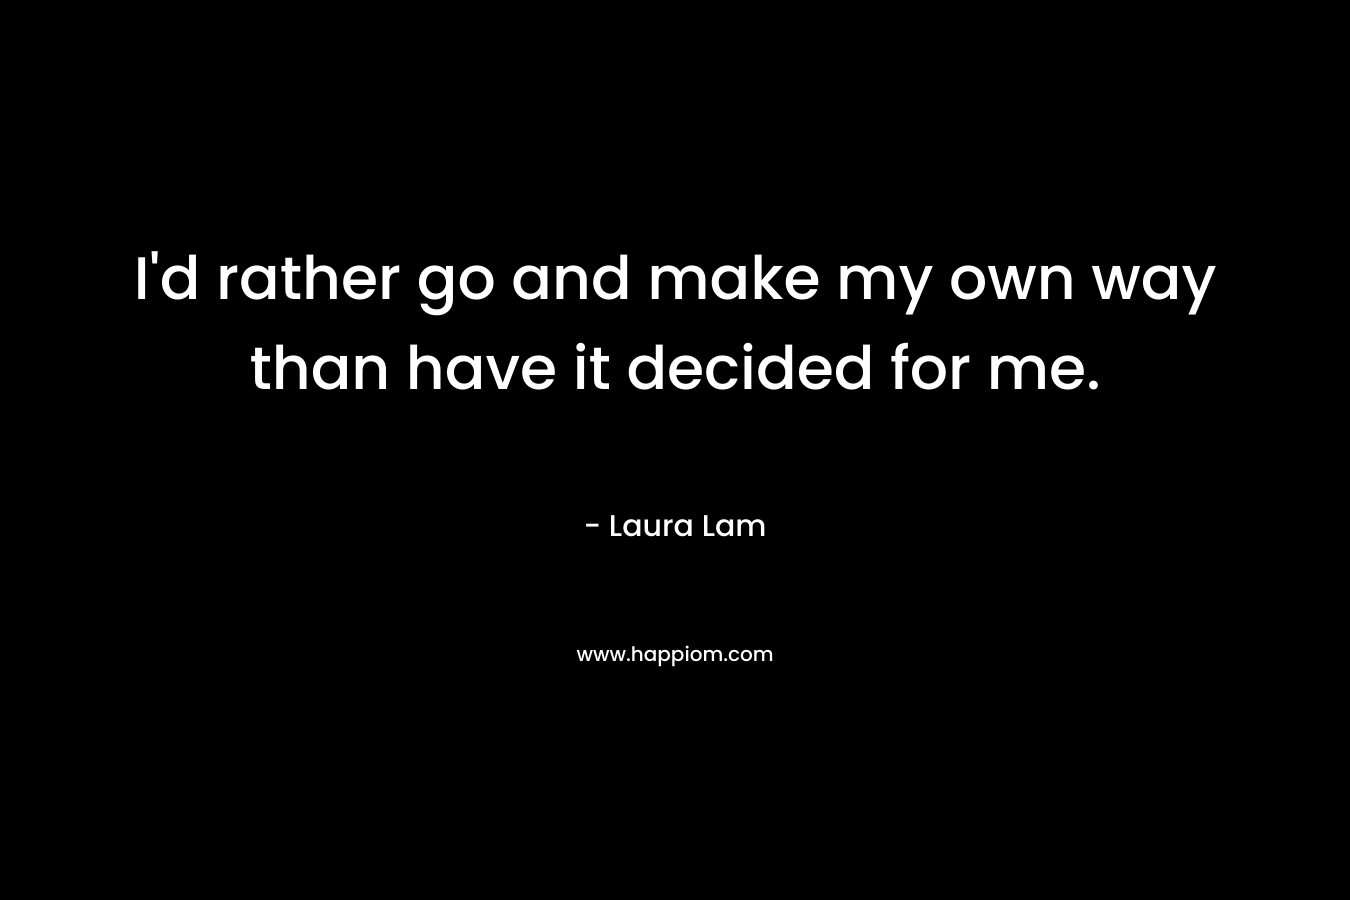 I’d rather go and make my own way than have it decided for me. – Laura Lam